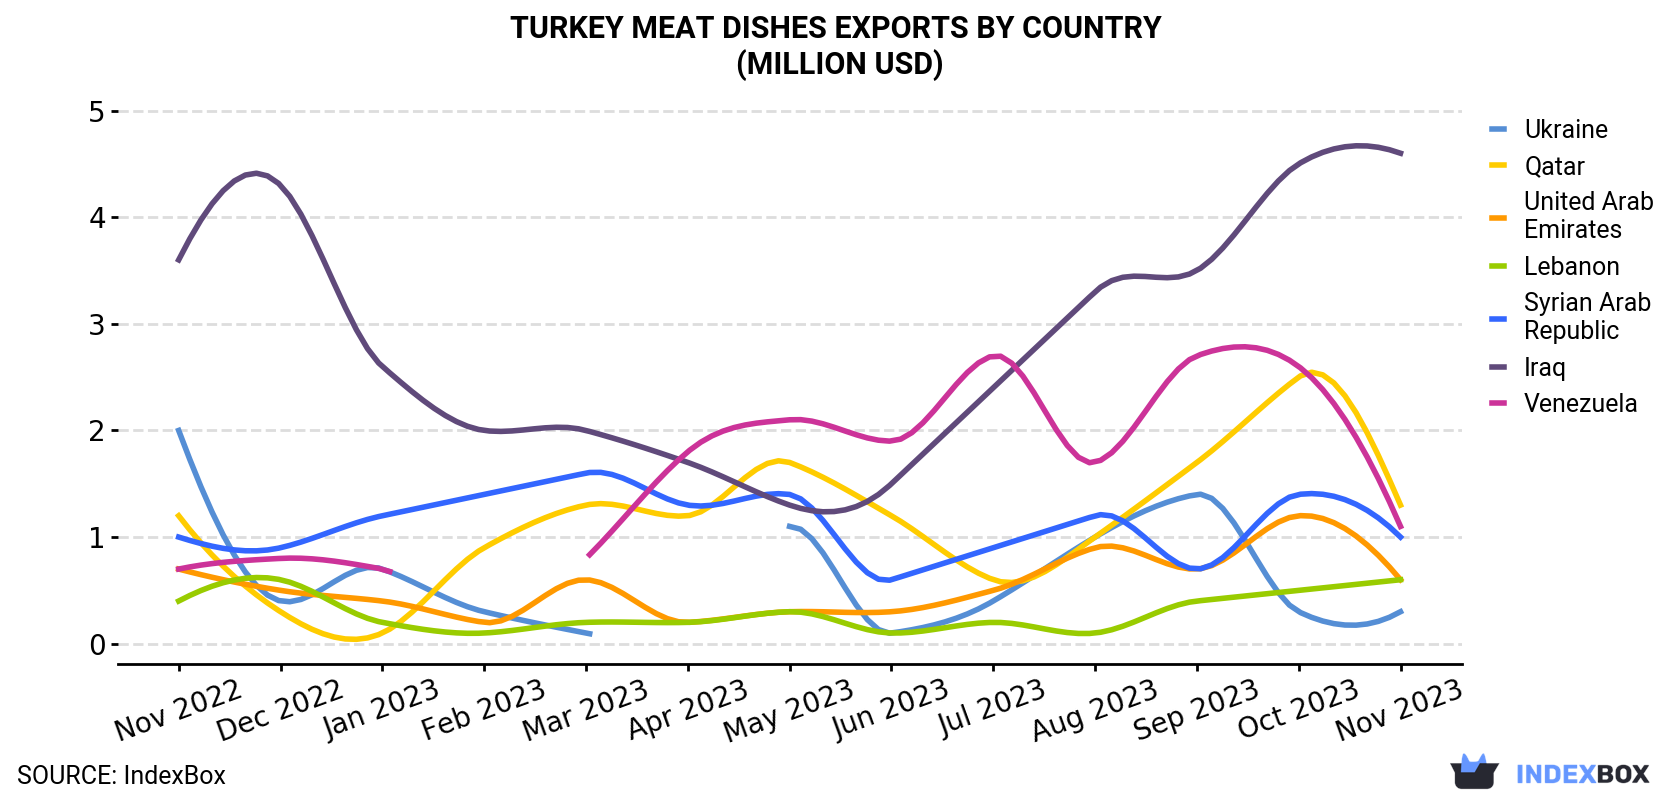 Turkey Meat Dishes Exports By Country (Million USD)